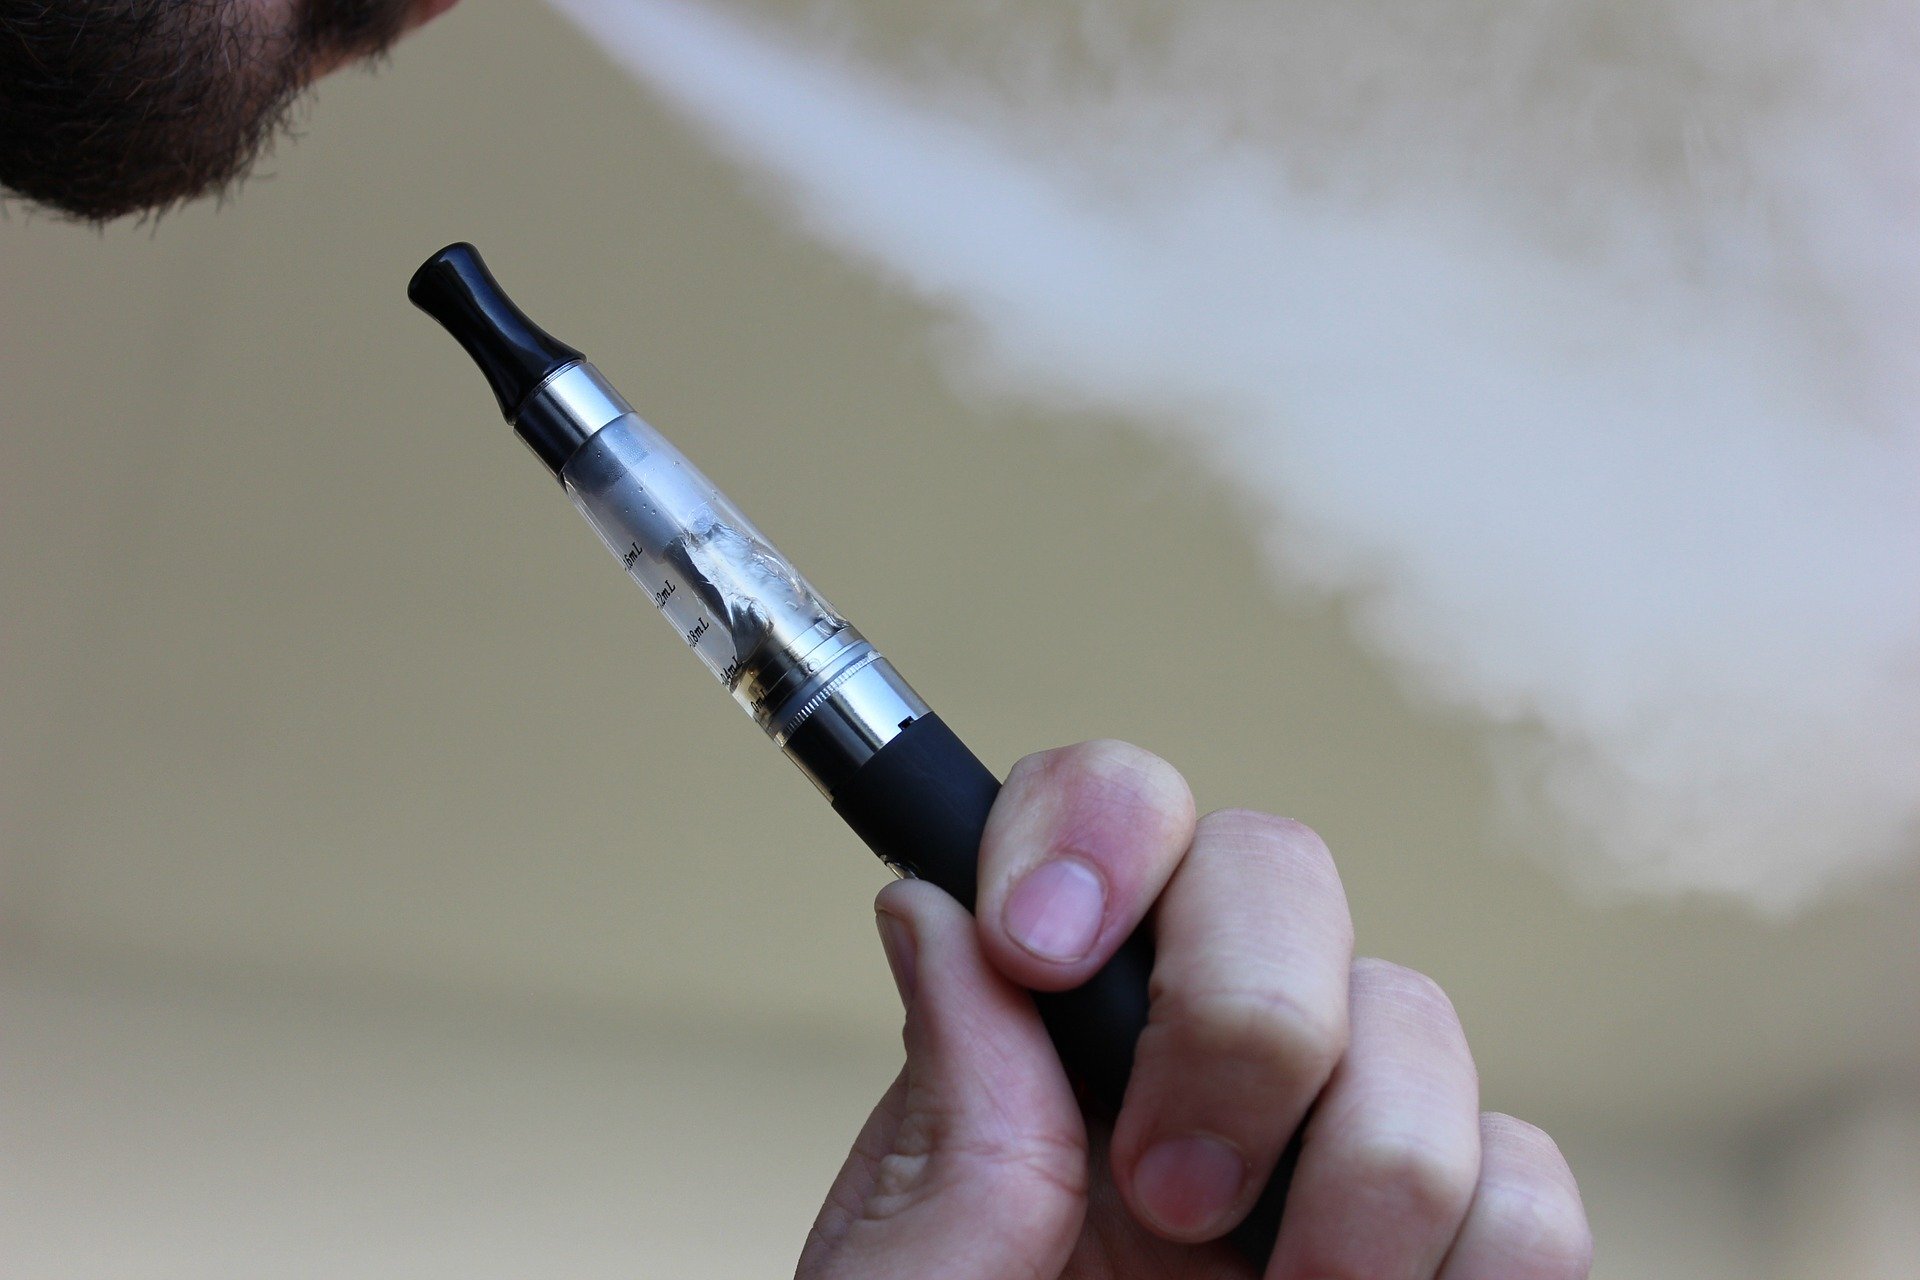 New studies suggest that vaporization can cloud your thoughts